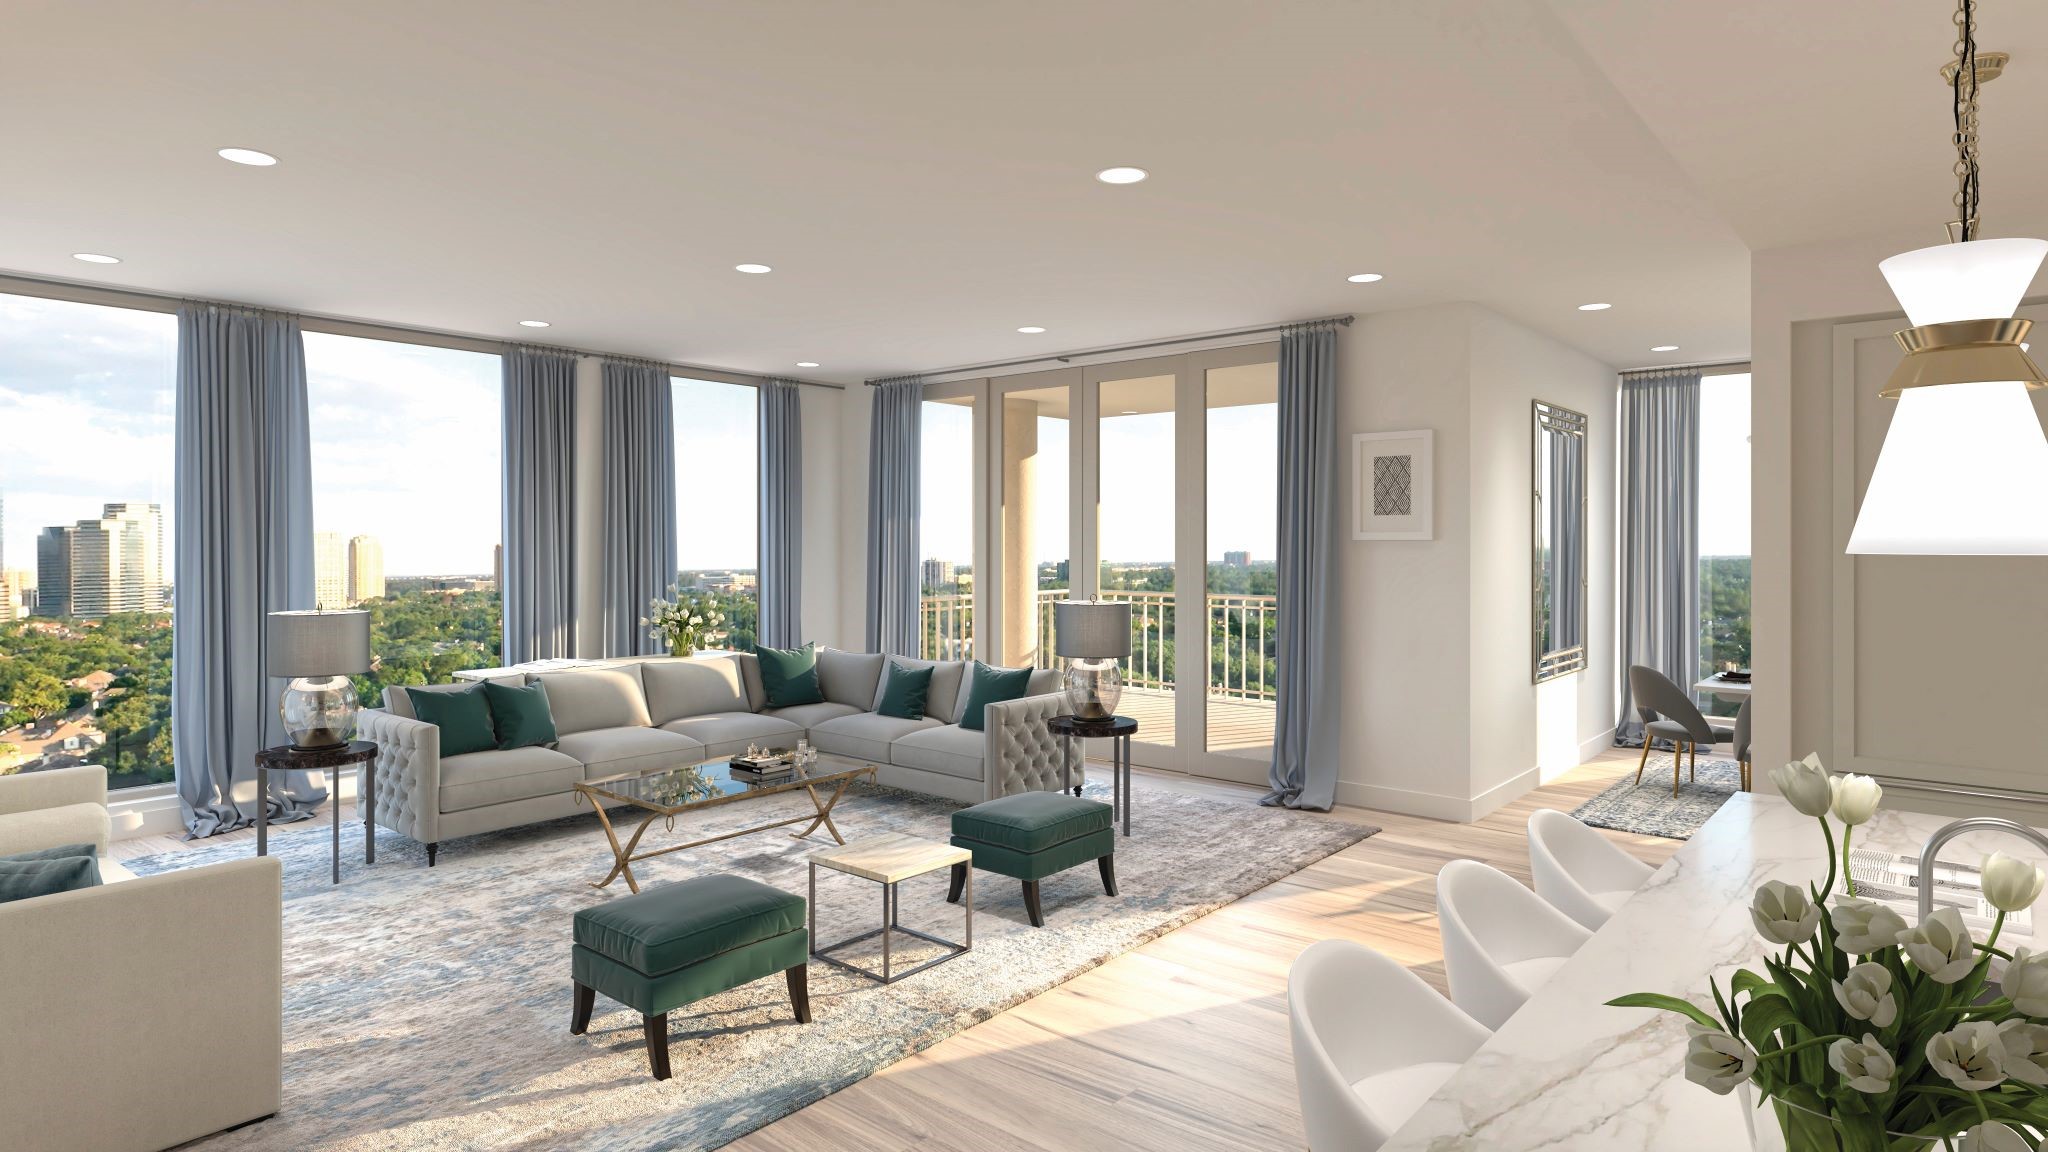 Soaking in natural light and the very best in finishes and features, your home is certainly intended to be an oasis of tranquility and refinement. Offering the very best city views--Uptown, Tanglewood, sunrises, and sunsets--do not wait to pick your view today!